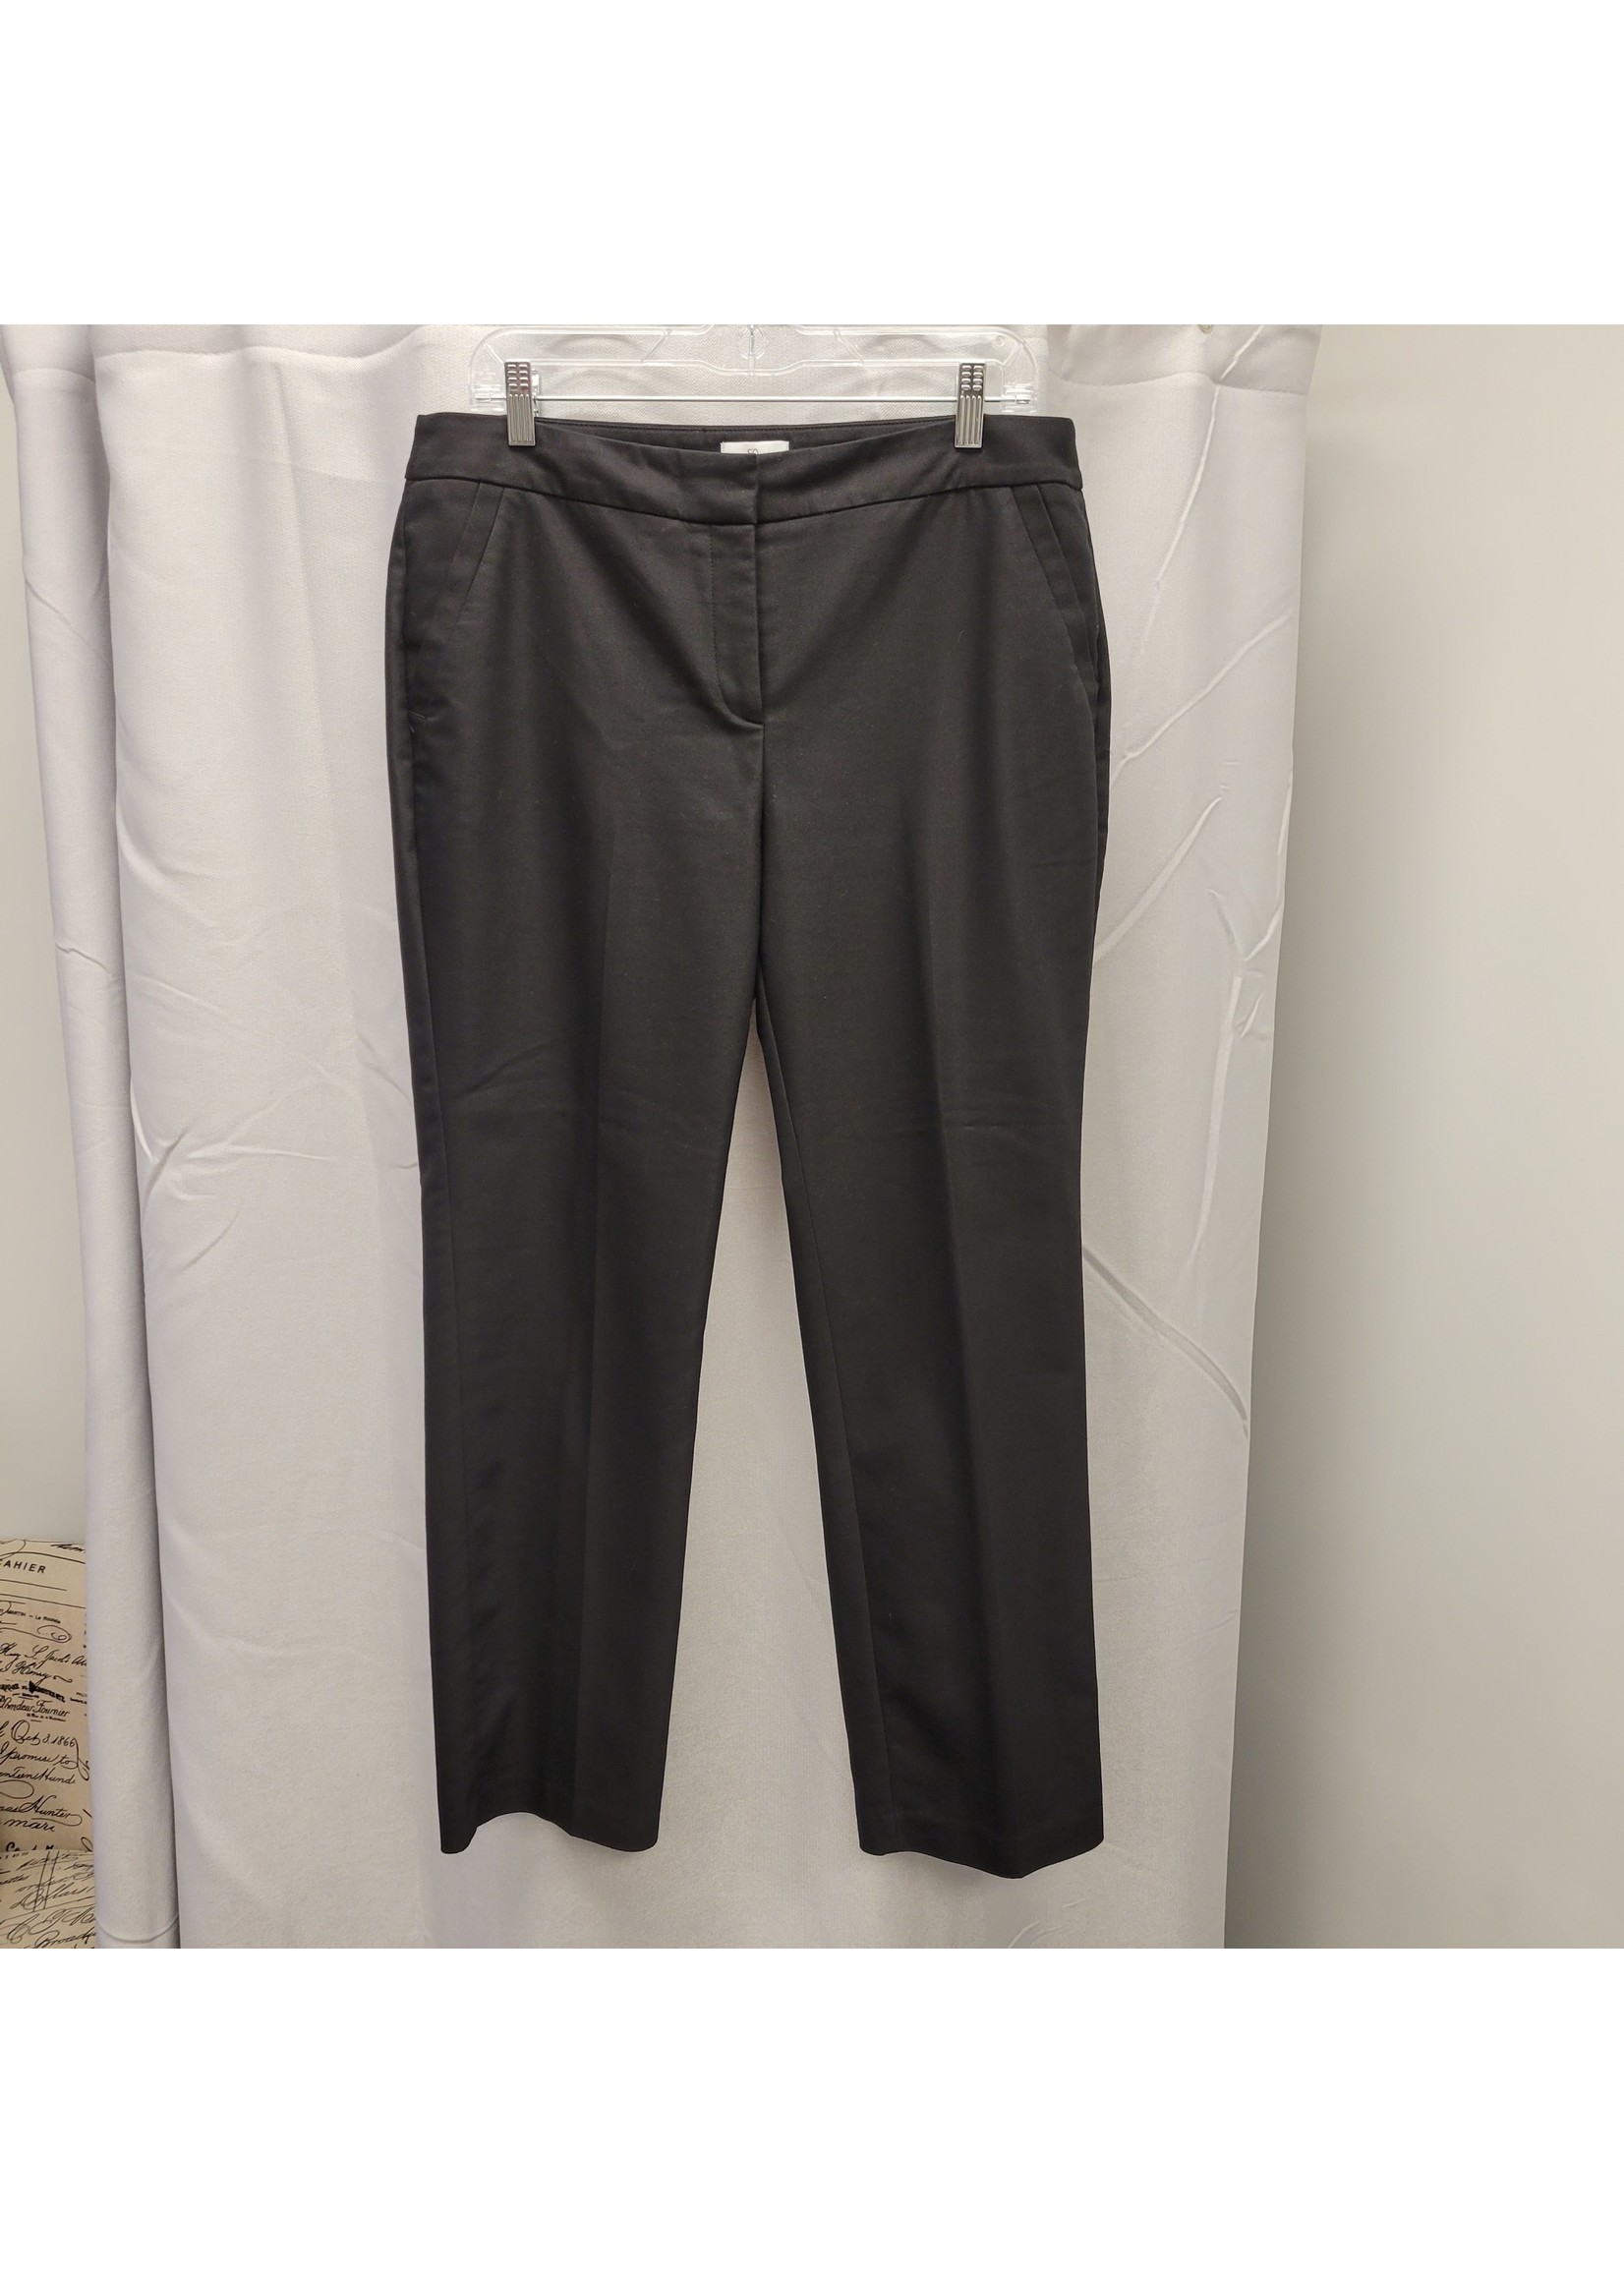 So Slimming Short Casual Pants (1.5) M/10 Pre-owned - Doubletake Boutique  LLC